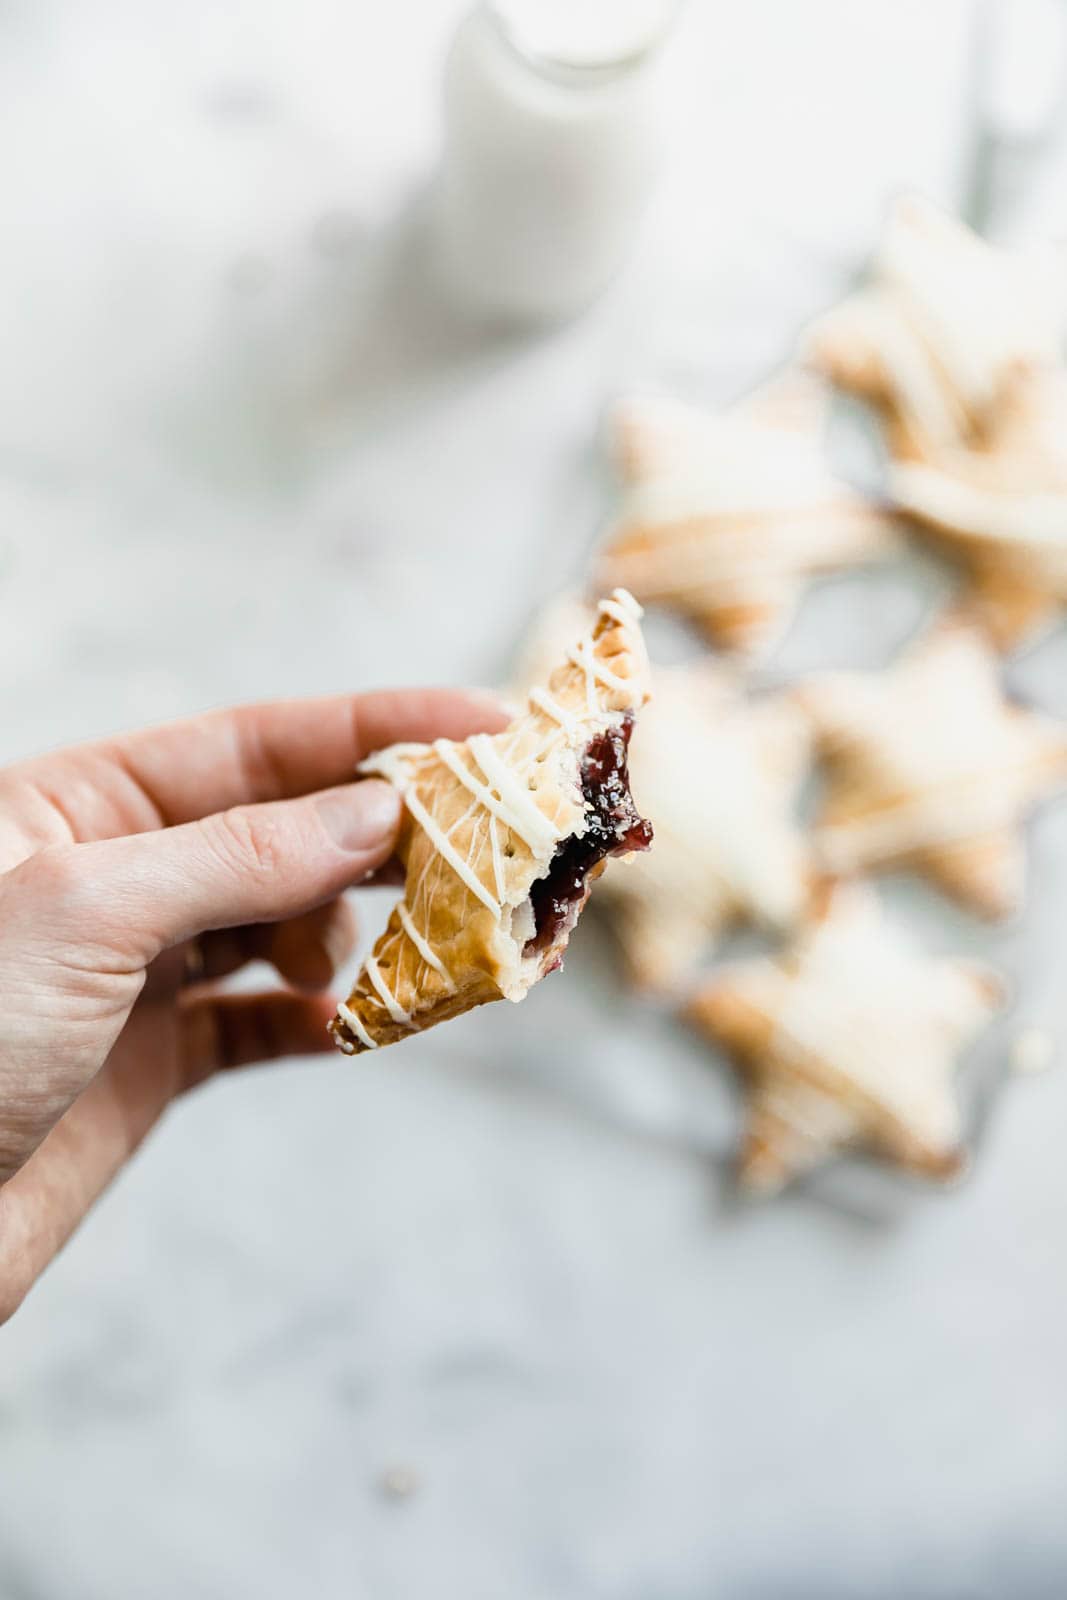 Sometimes, you just want pie. And some of those sometimes, you want pie that fits in your hand. Enter: these White Chocolate Blueberry Star Shaped Hand Pies